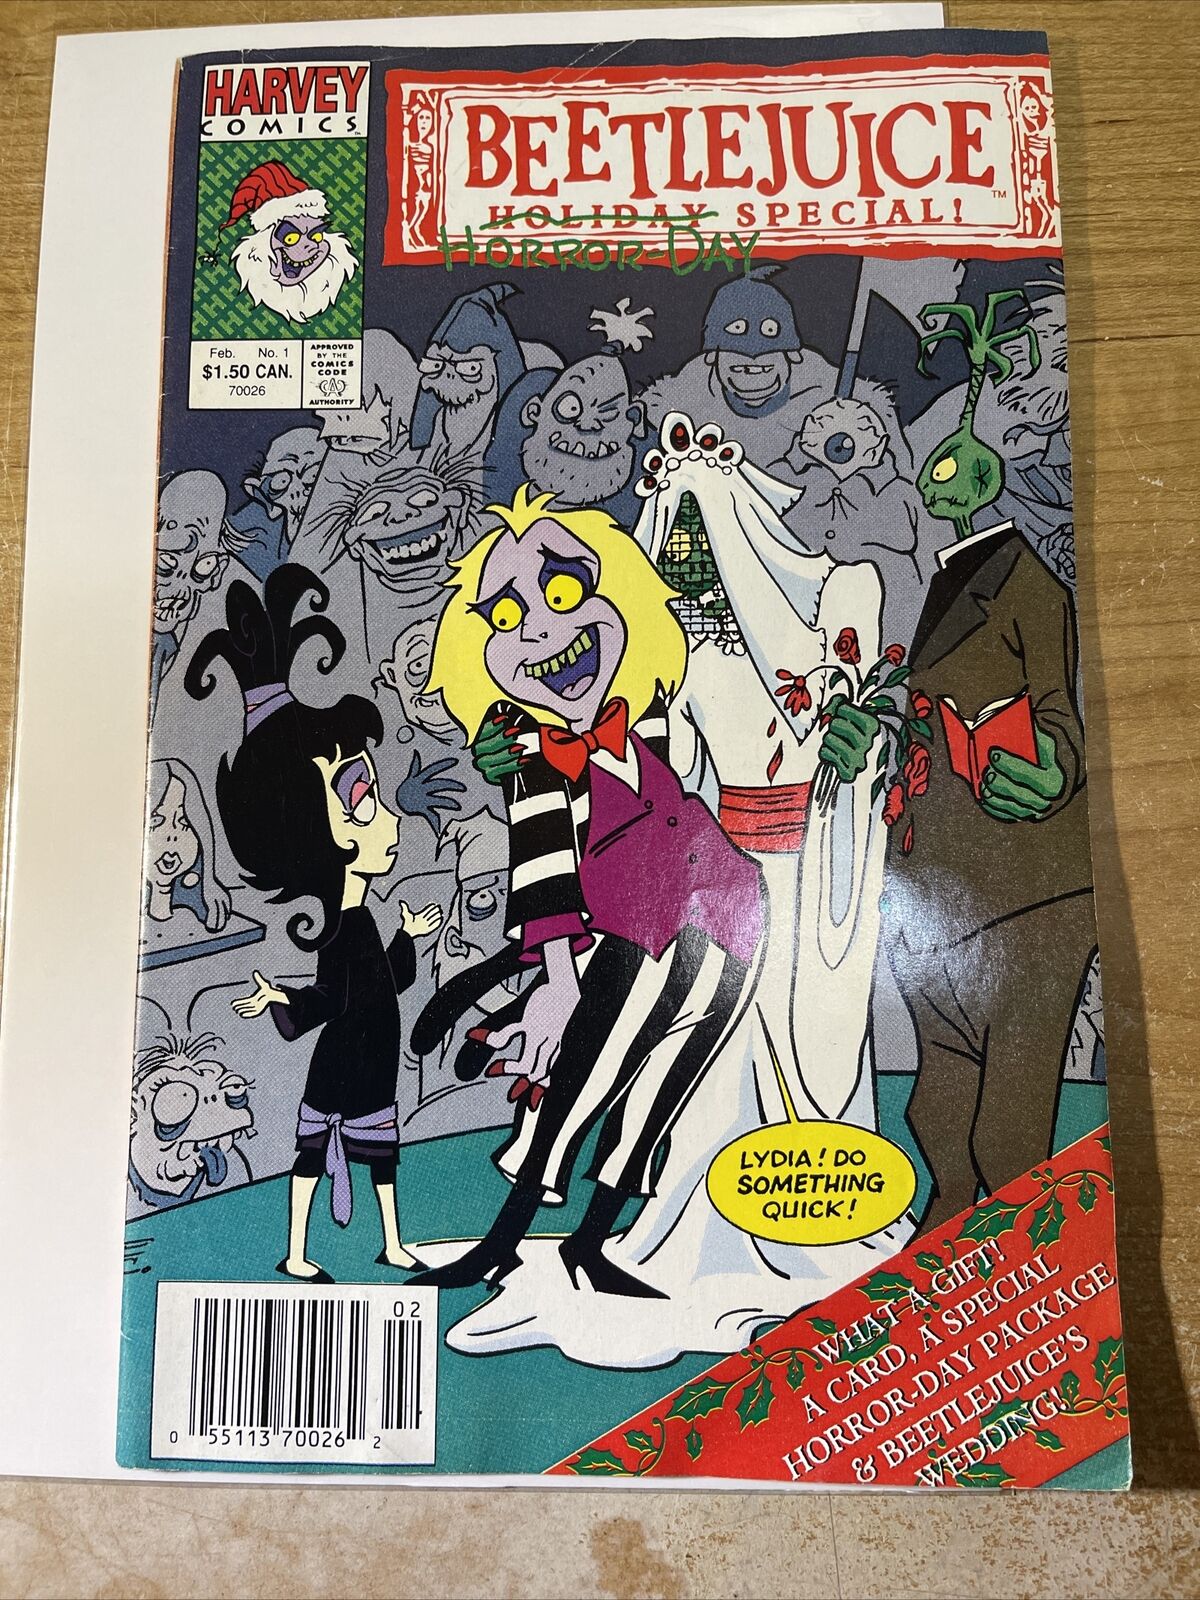 Beetlejuice Holiday Special #1 Comic Harvey 1992 Horror Day Animated Series RARE